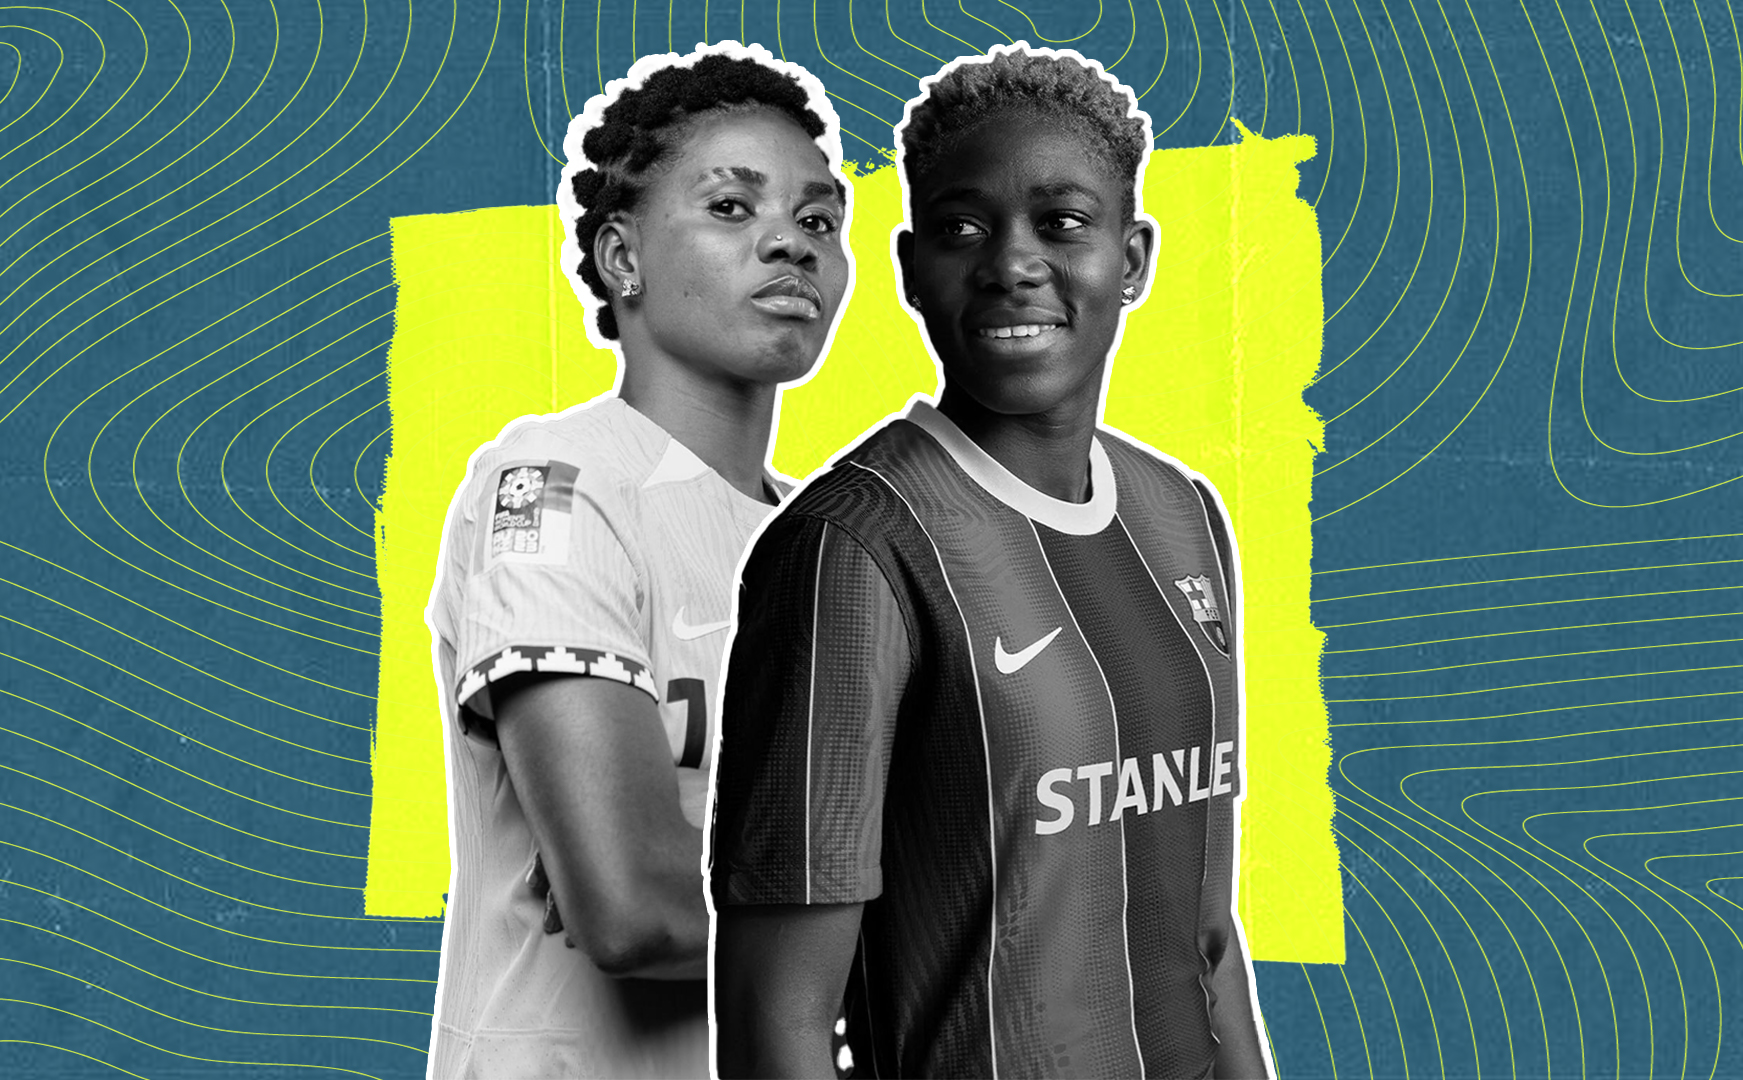 Gift Monday: A Journey of Dreams, Aspirations, and Asisat Oshoala's Guiding Light